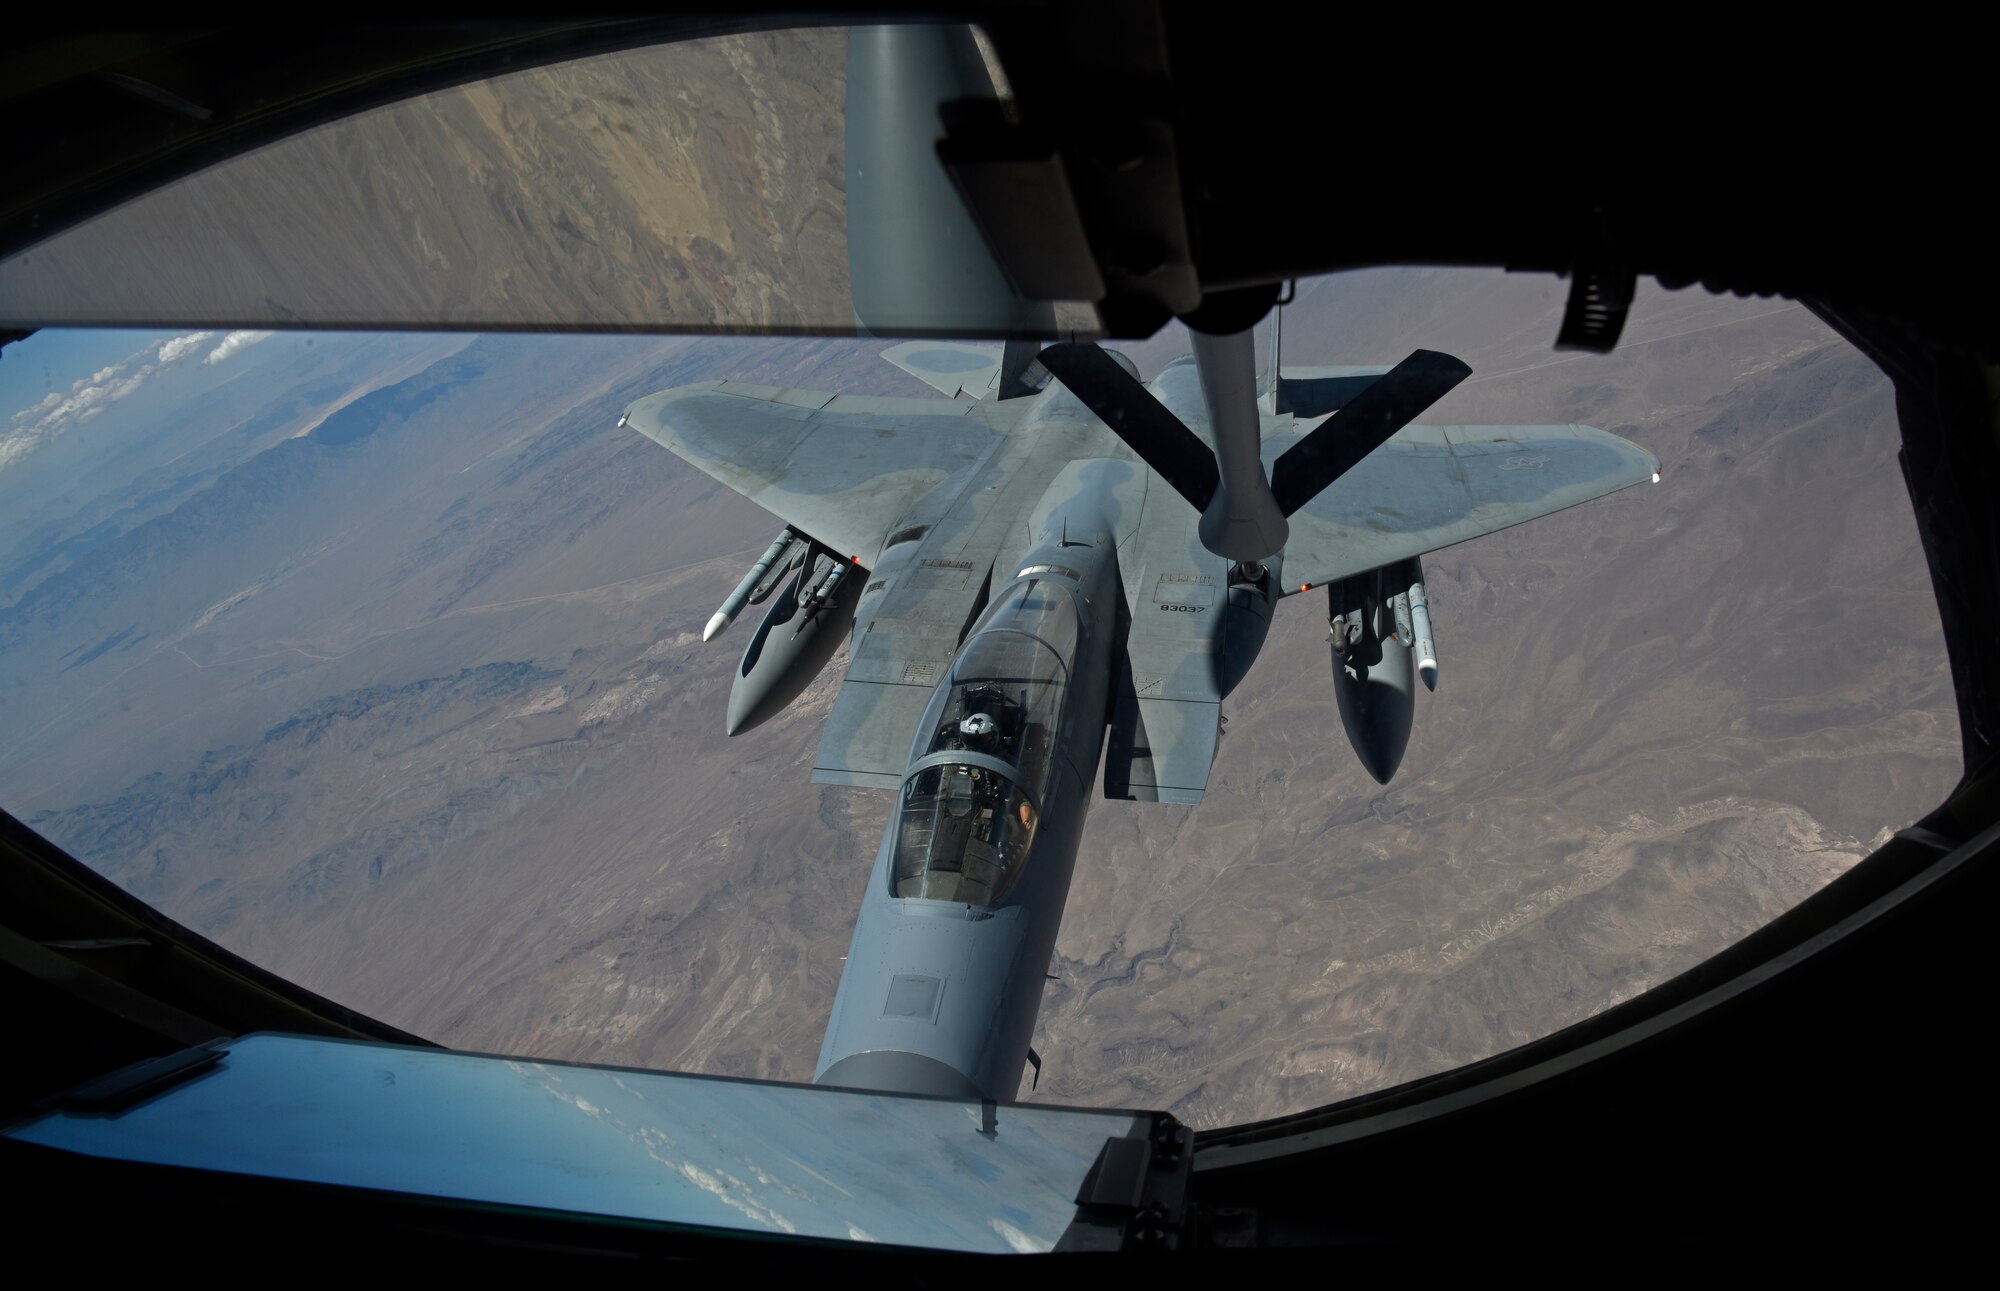 An U.S. Air Force F-15 Eagle receives fuel from a KC-135 Stratotanker belonging to Fairchild Air Force Base during the Weapons School Integration at Nellis Air Force Base, Nevada, June 4, 2020. Fairchild partnered with the 509th Weapons Squadron for their Weapons School Integration capstone exercise to host over 150 aircraft and perform peer-to-peer combat training. (U.S. Air Force photo by Senior Airman Jesenia Landaverde)